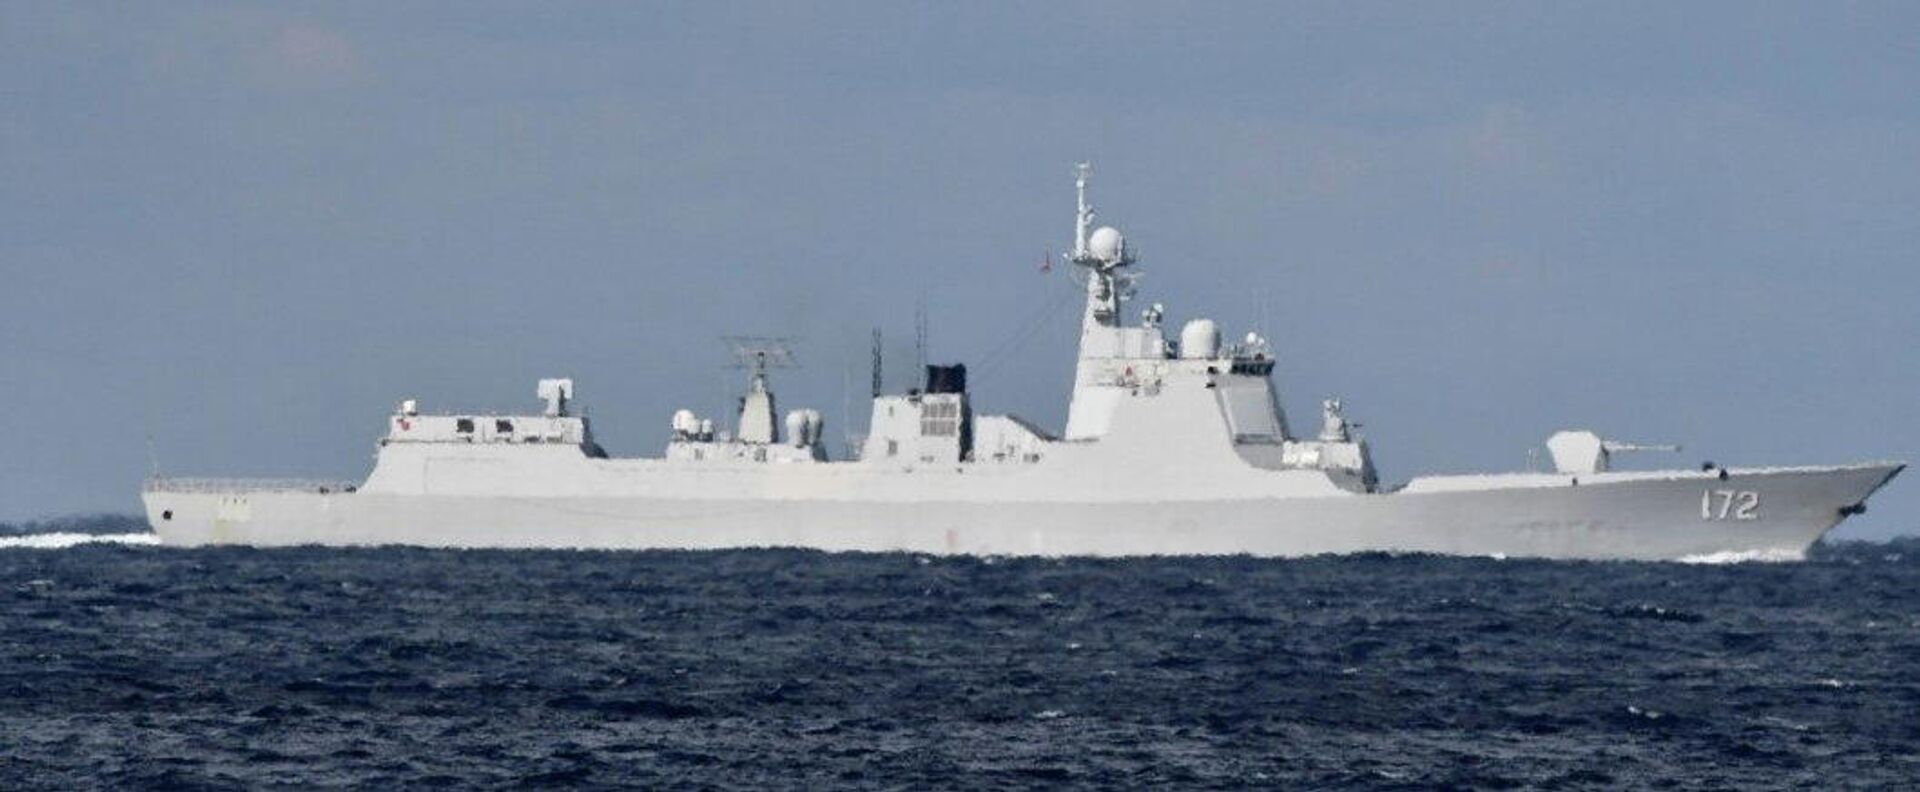 Chinese Navy's Kunming-class destroyer No.172 sails on the sea near Japan, in this handout photo taken by Japan Self-Defense Forces on October 18, 2021 and released by the Joint Staff Office of the Defense Ministry of Japan - Sputnik International, 1920, 19.10.2021